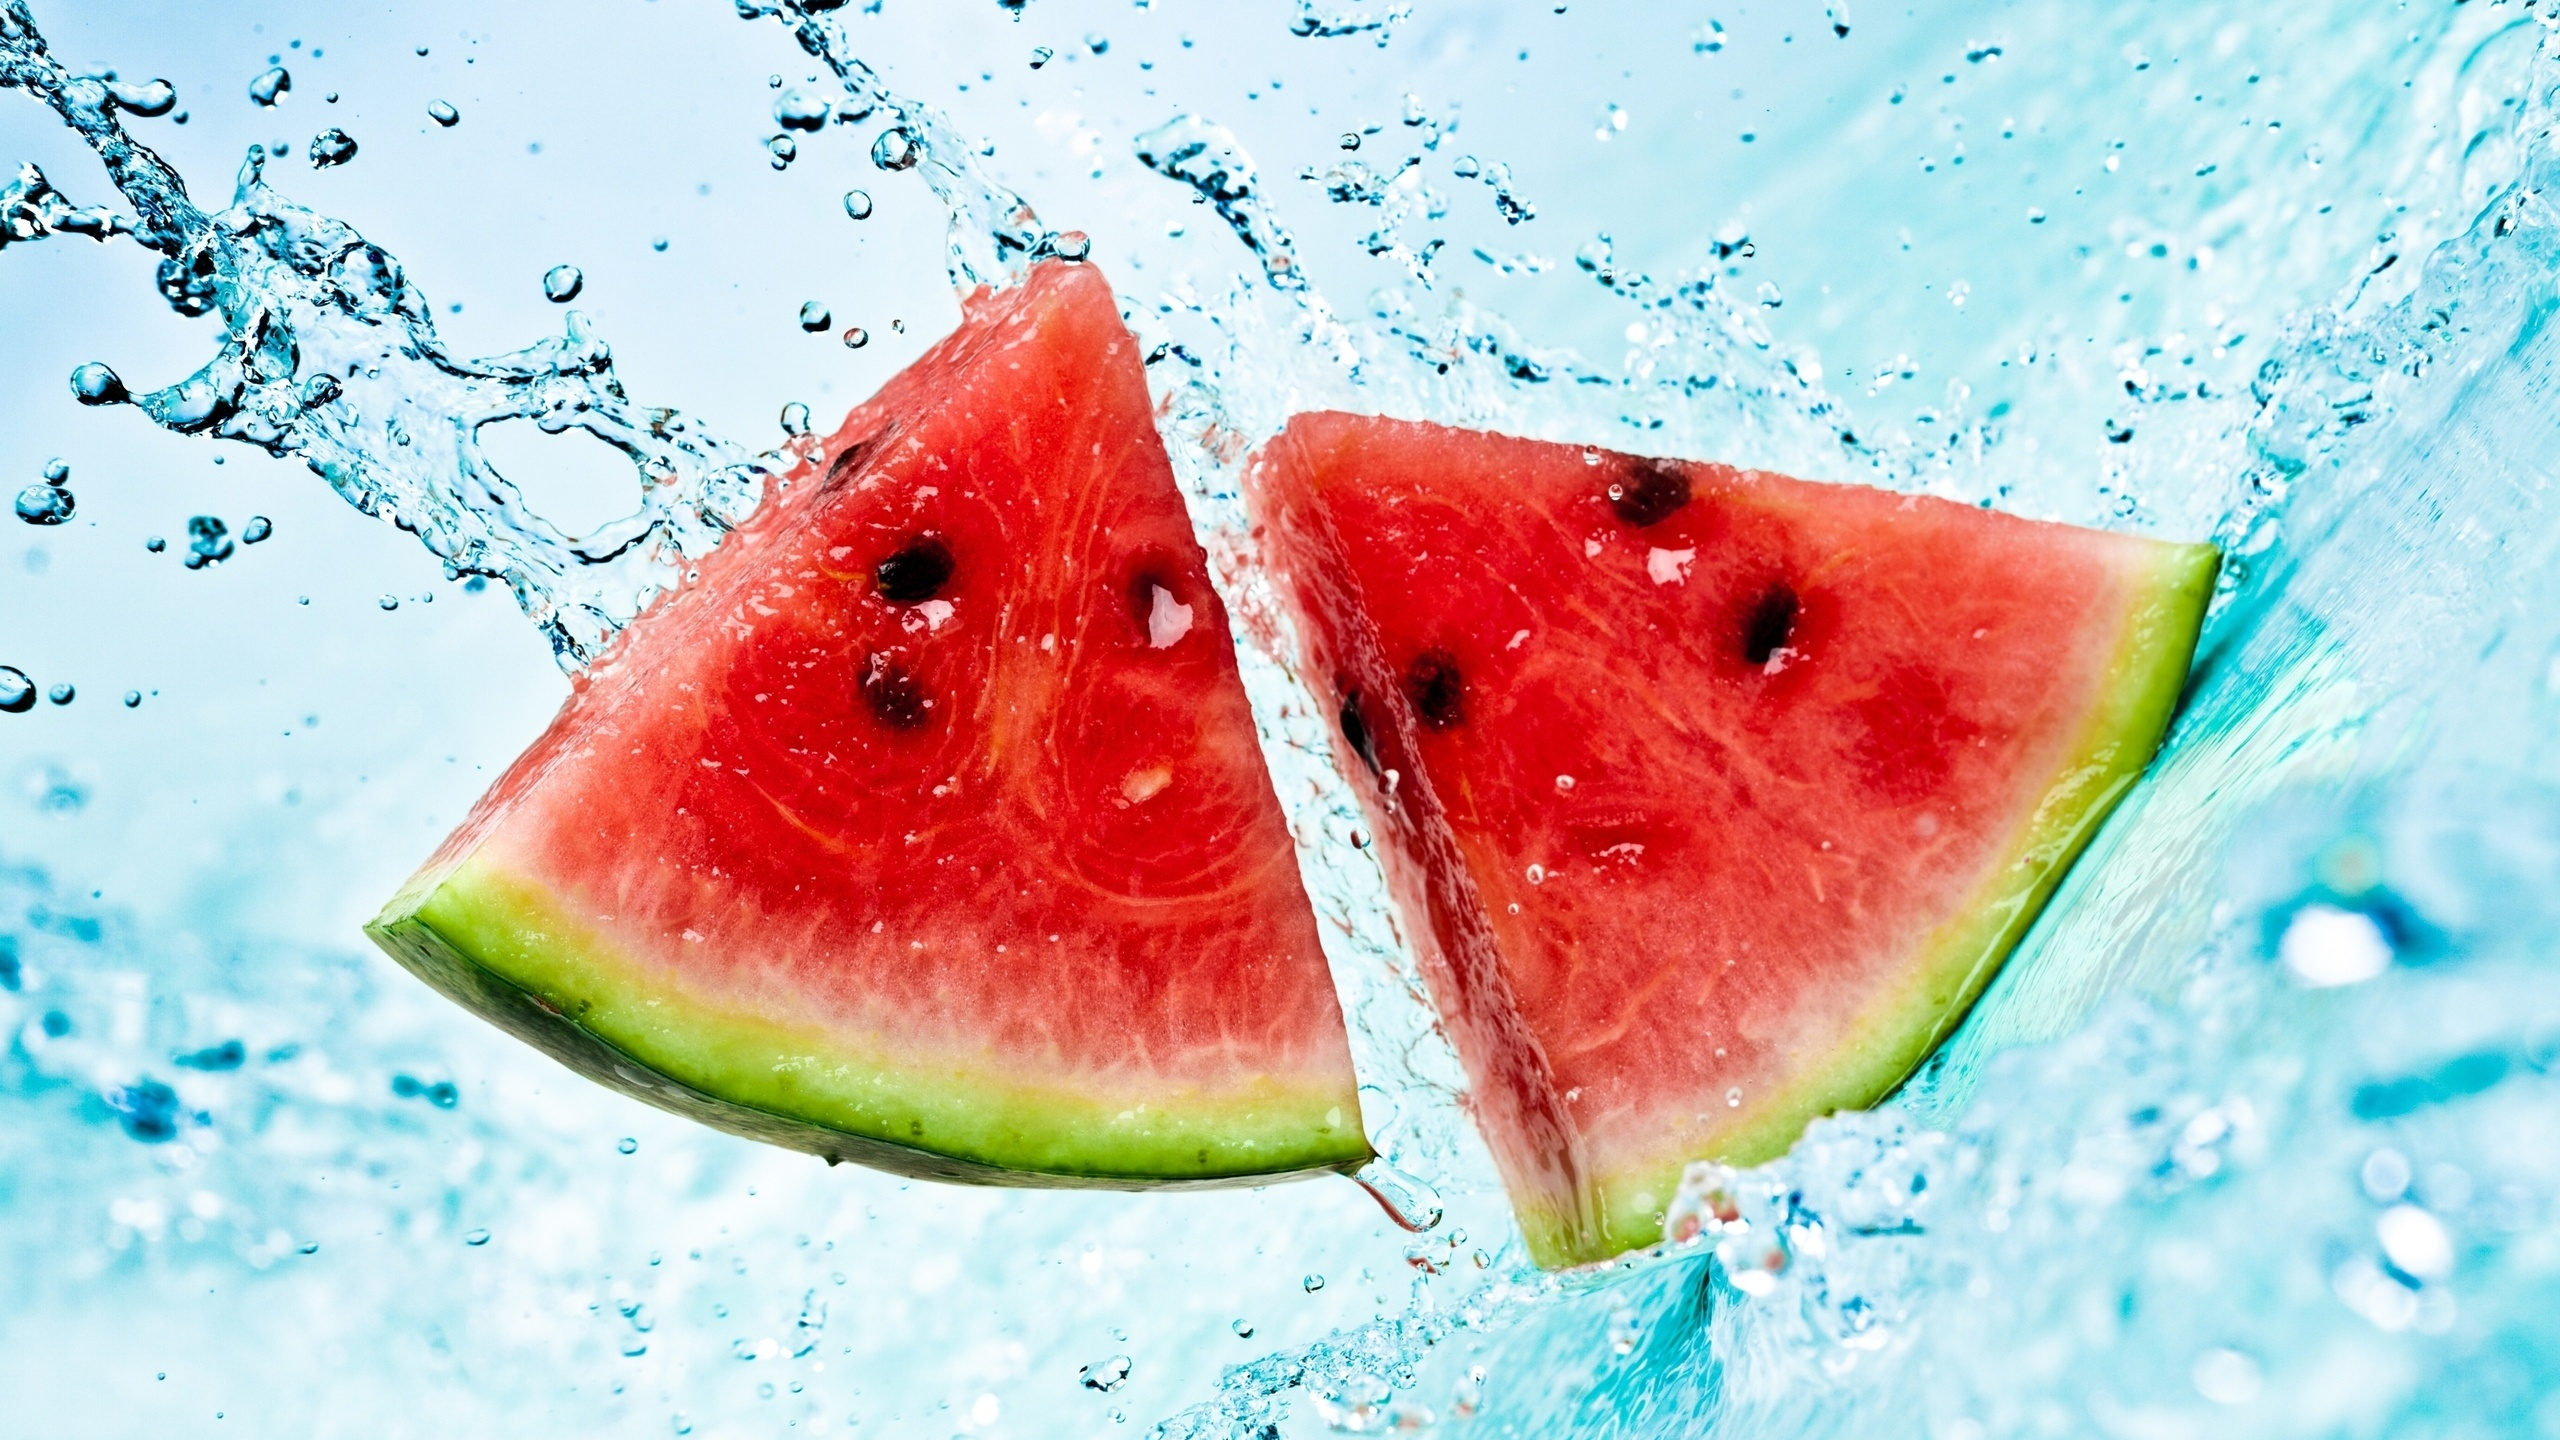 Sliced Watermelon on Water With Water Droplets. Wallpaper in 2560x1440 Resolution